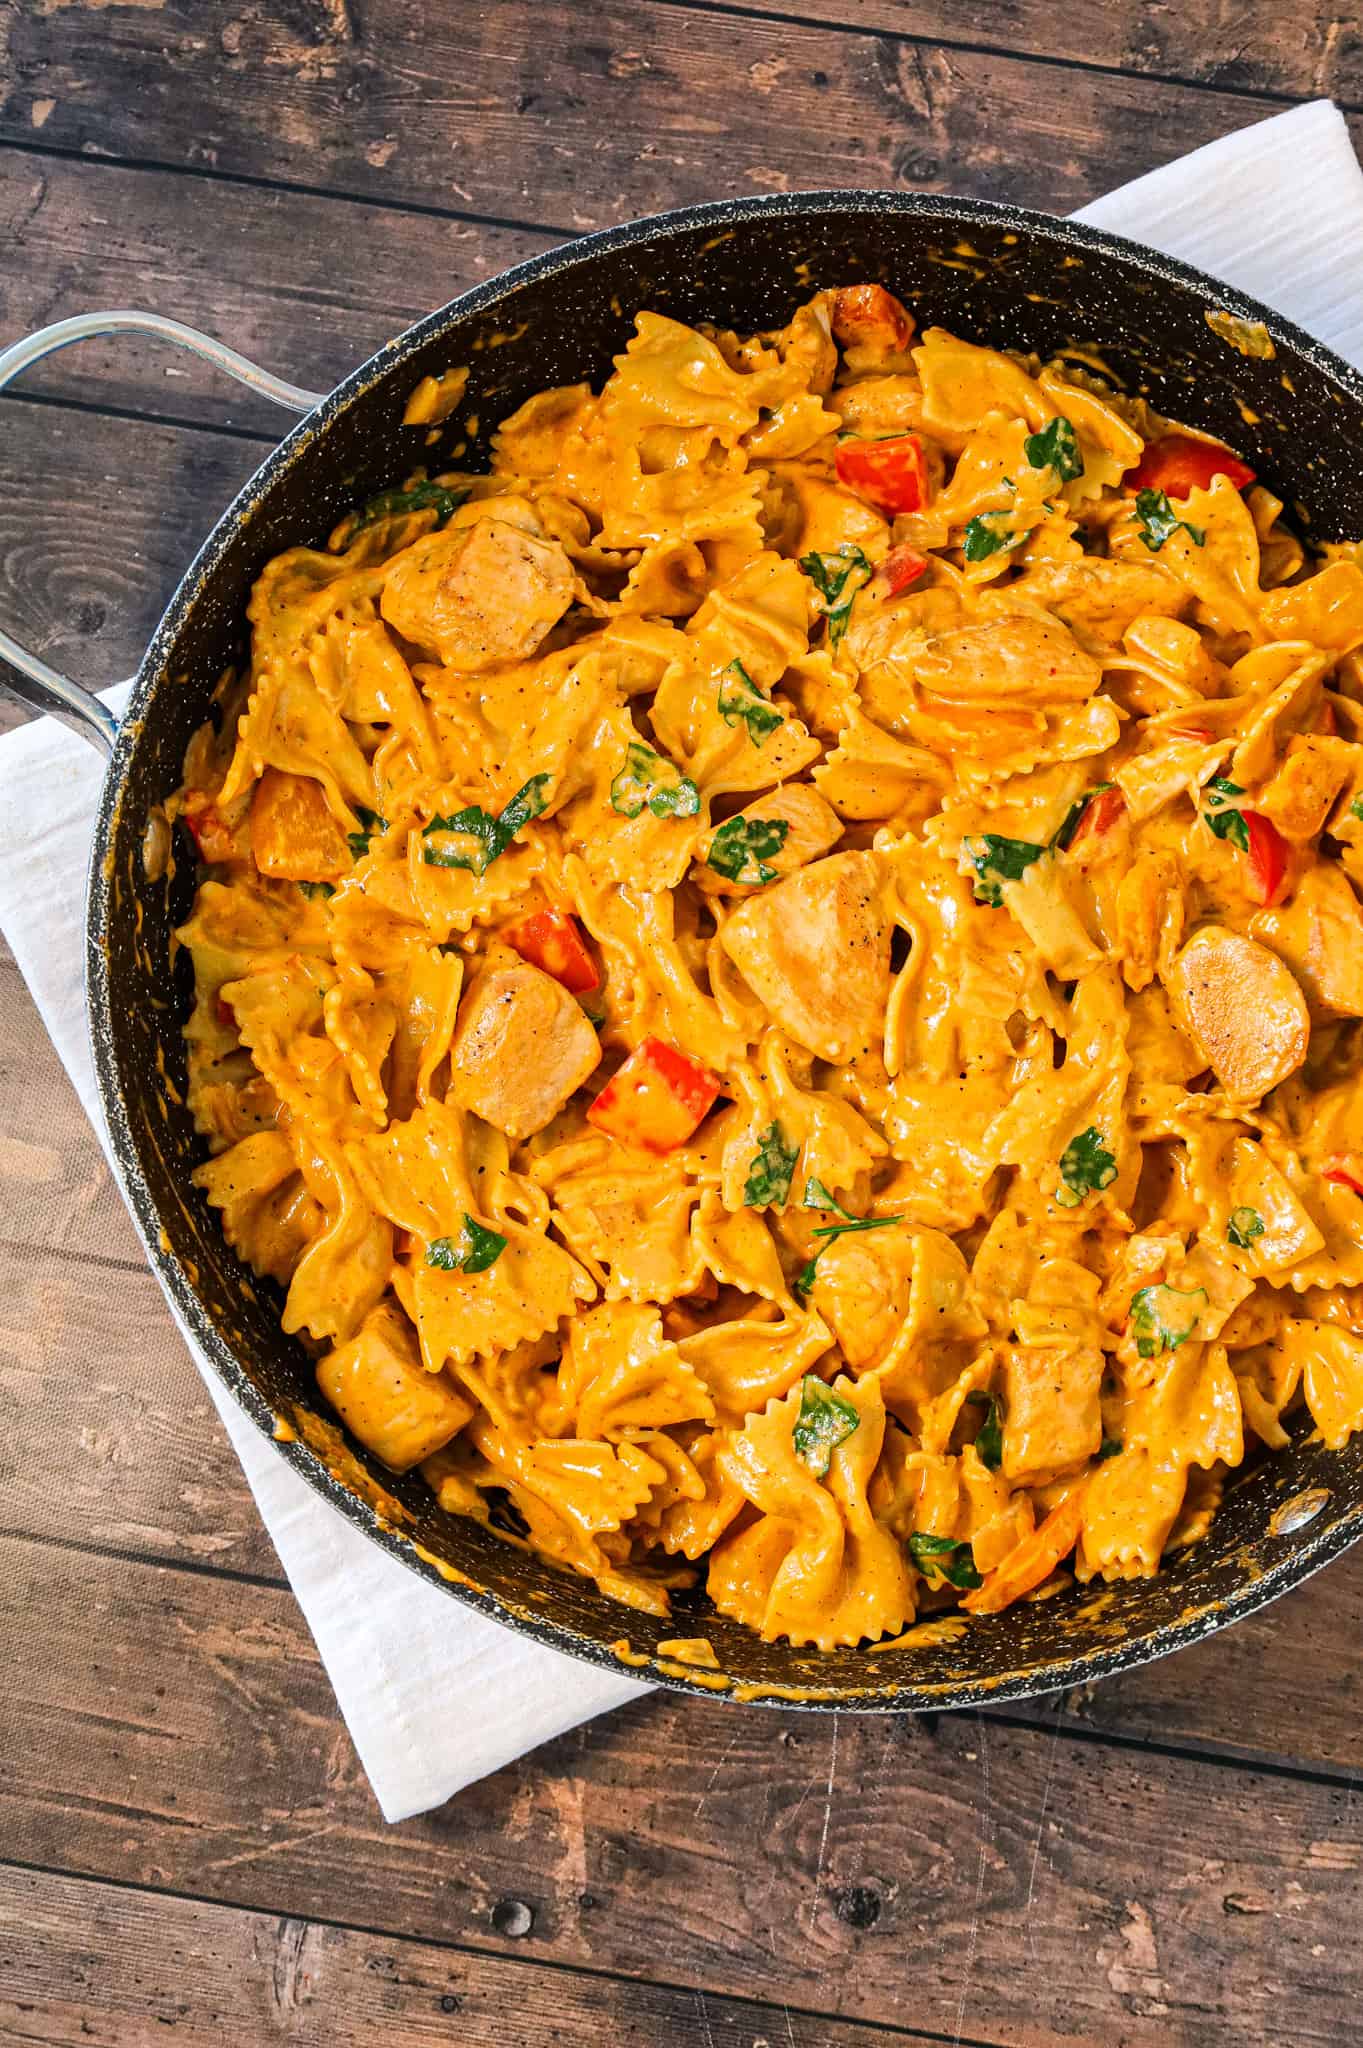 Spicy Chicken Chipotle Pasta is a delicious creamy pasta recipe loaded with diced peppers, parmesan cheese, chipotle pepper sauce and chicken breast chunks.